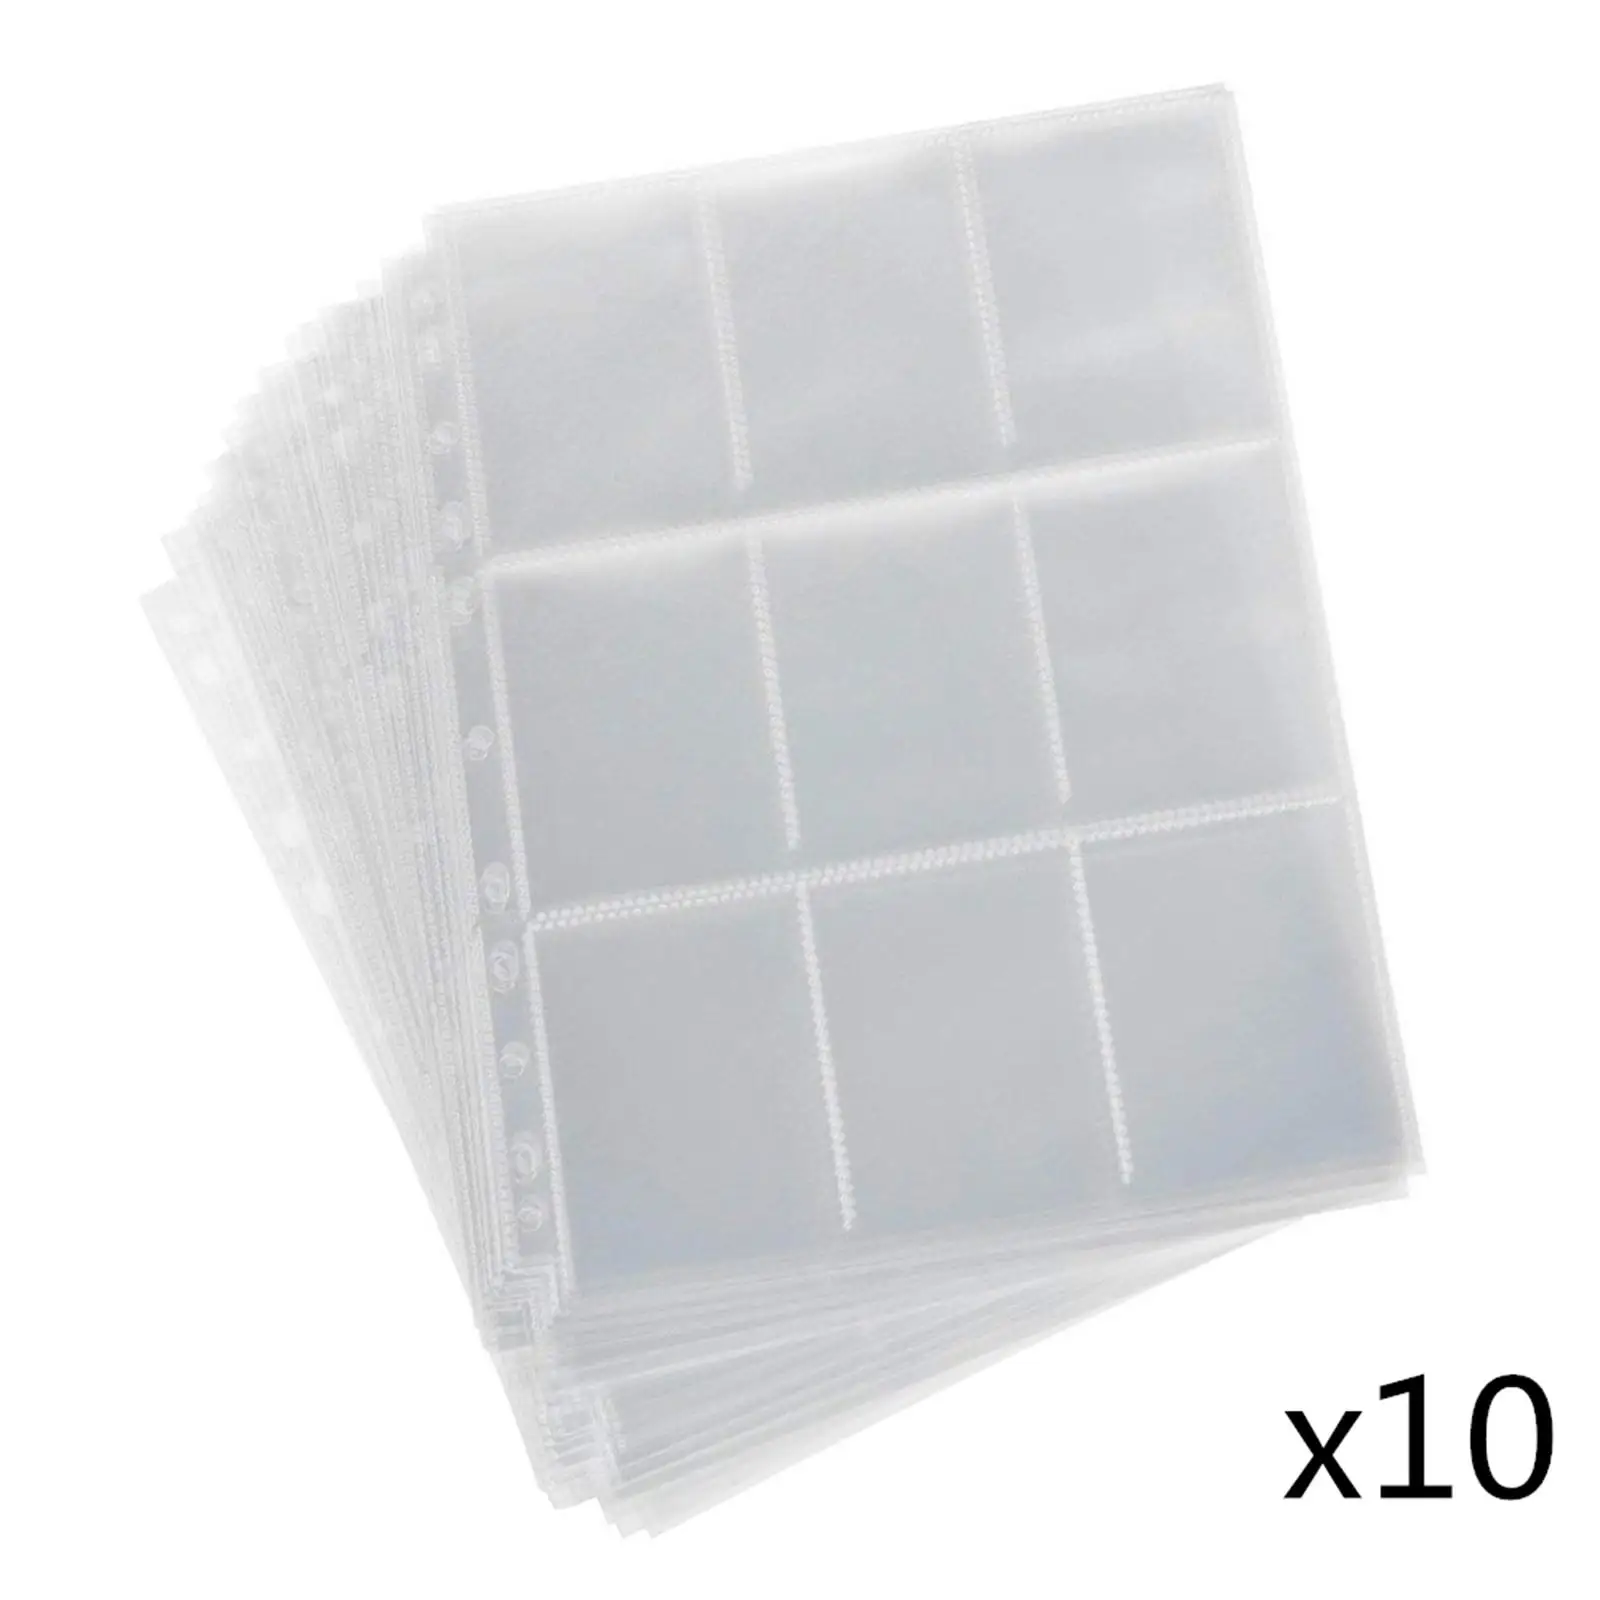 10 Sheets (90 Pockets) of Premium 9 Pocket  Protectors for  Cards,Gathering Cards,  , etc..